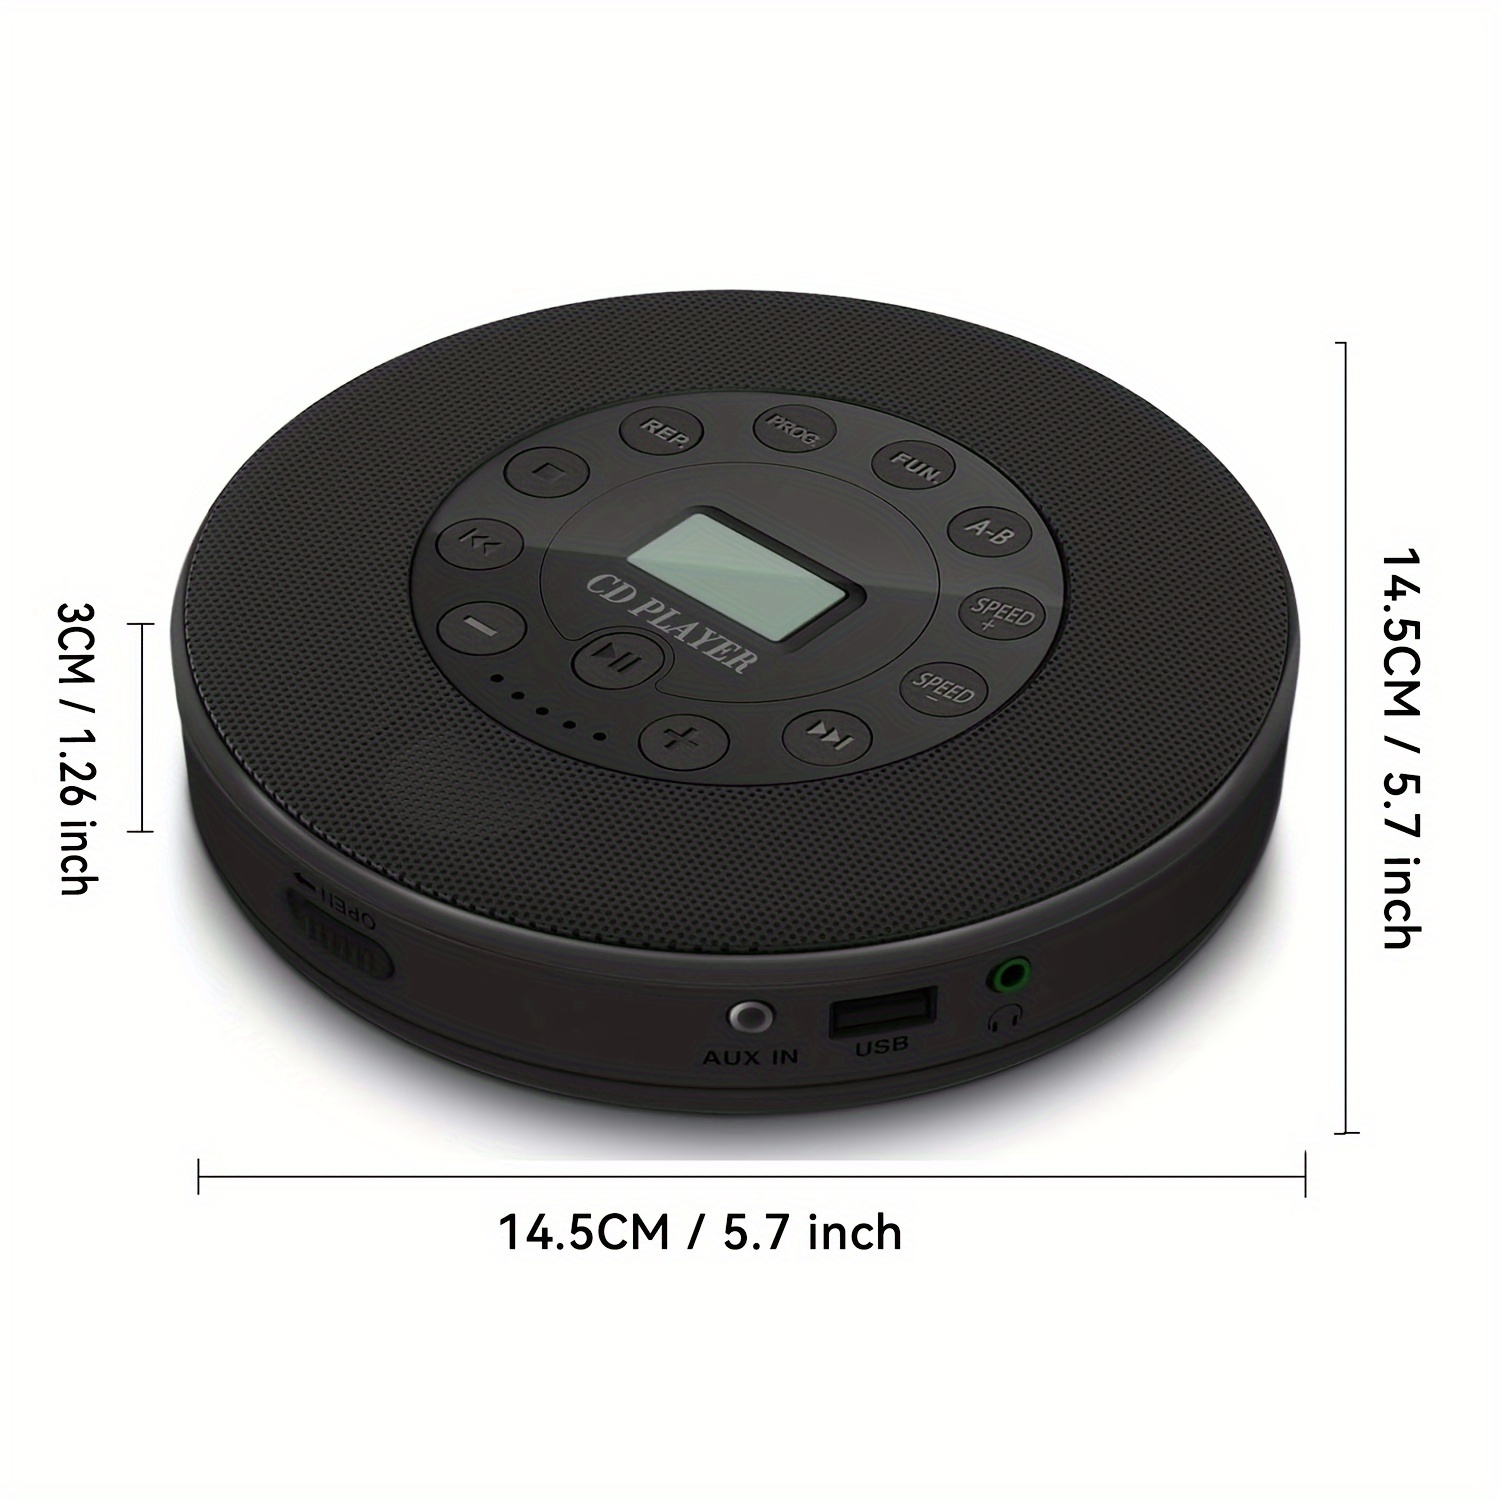 Portable CD Player with Rechargeable Battery - August SE10 - Dual Stereo  Speakers, Anti-Skip Protection, Aux Out & MP3 Player, CD & MicroSD, for  Home